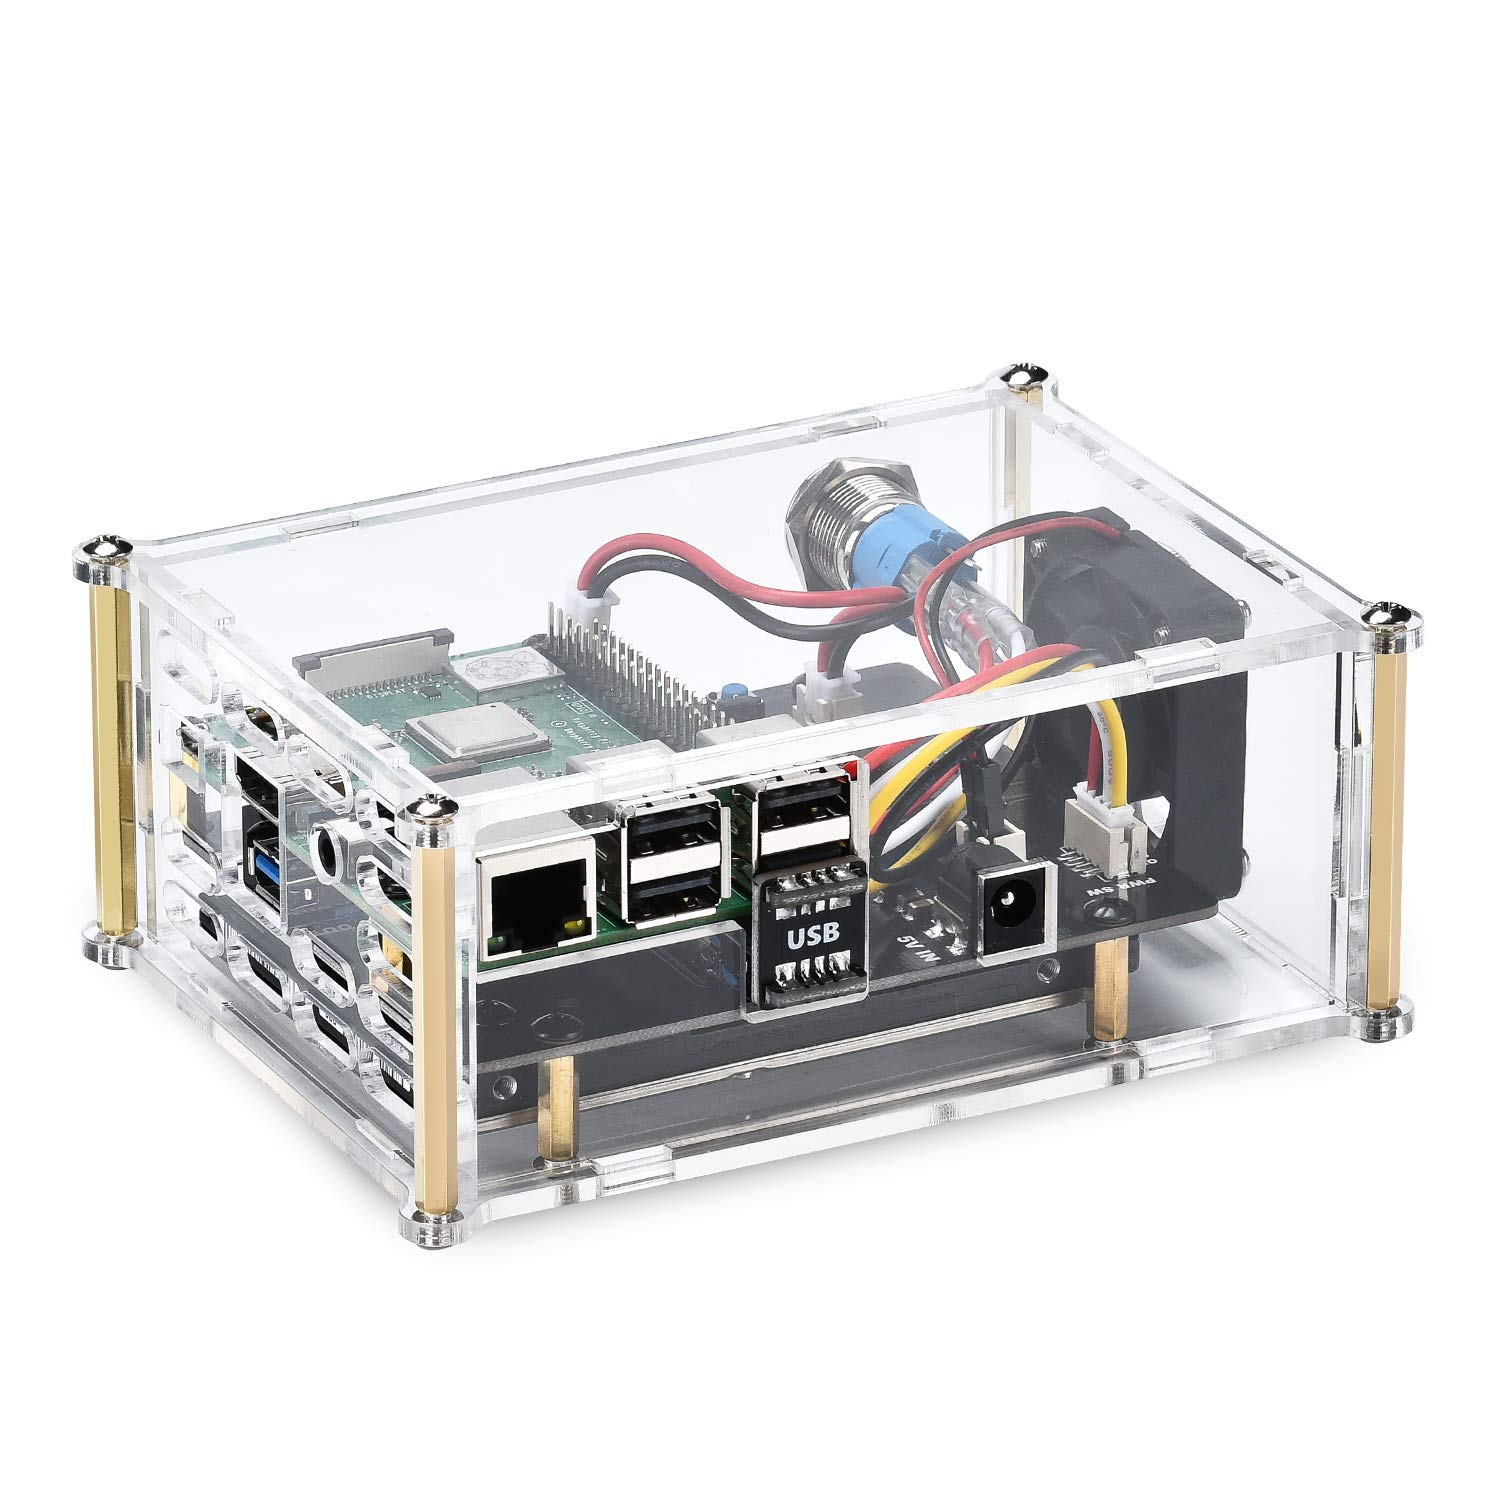 Acrylic Case with Cooling Fan for Raspberry Pi X820 V3.0 2.5" SATA HDD/SSD Shield Expansion Board Kit